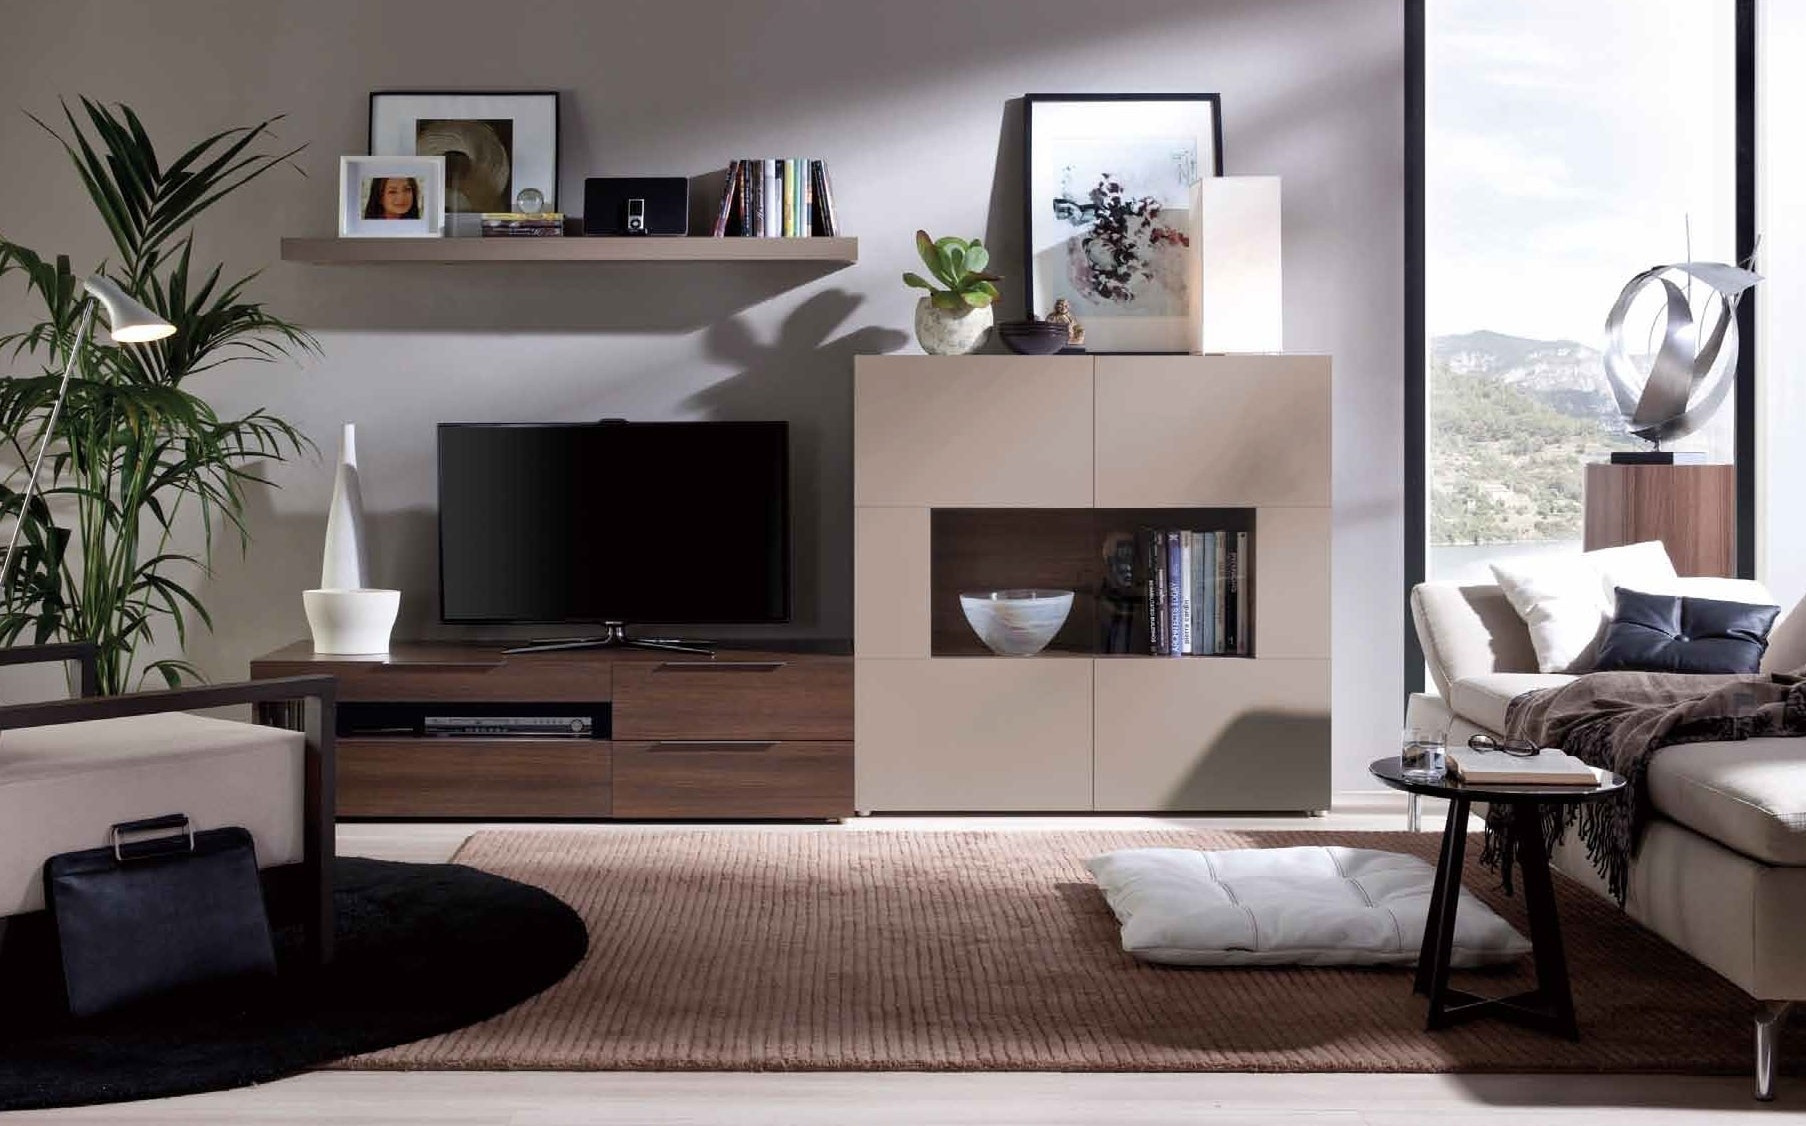 Wall Unit Bedroom Furniture
 15 Inspirations of Modern Wall Units